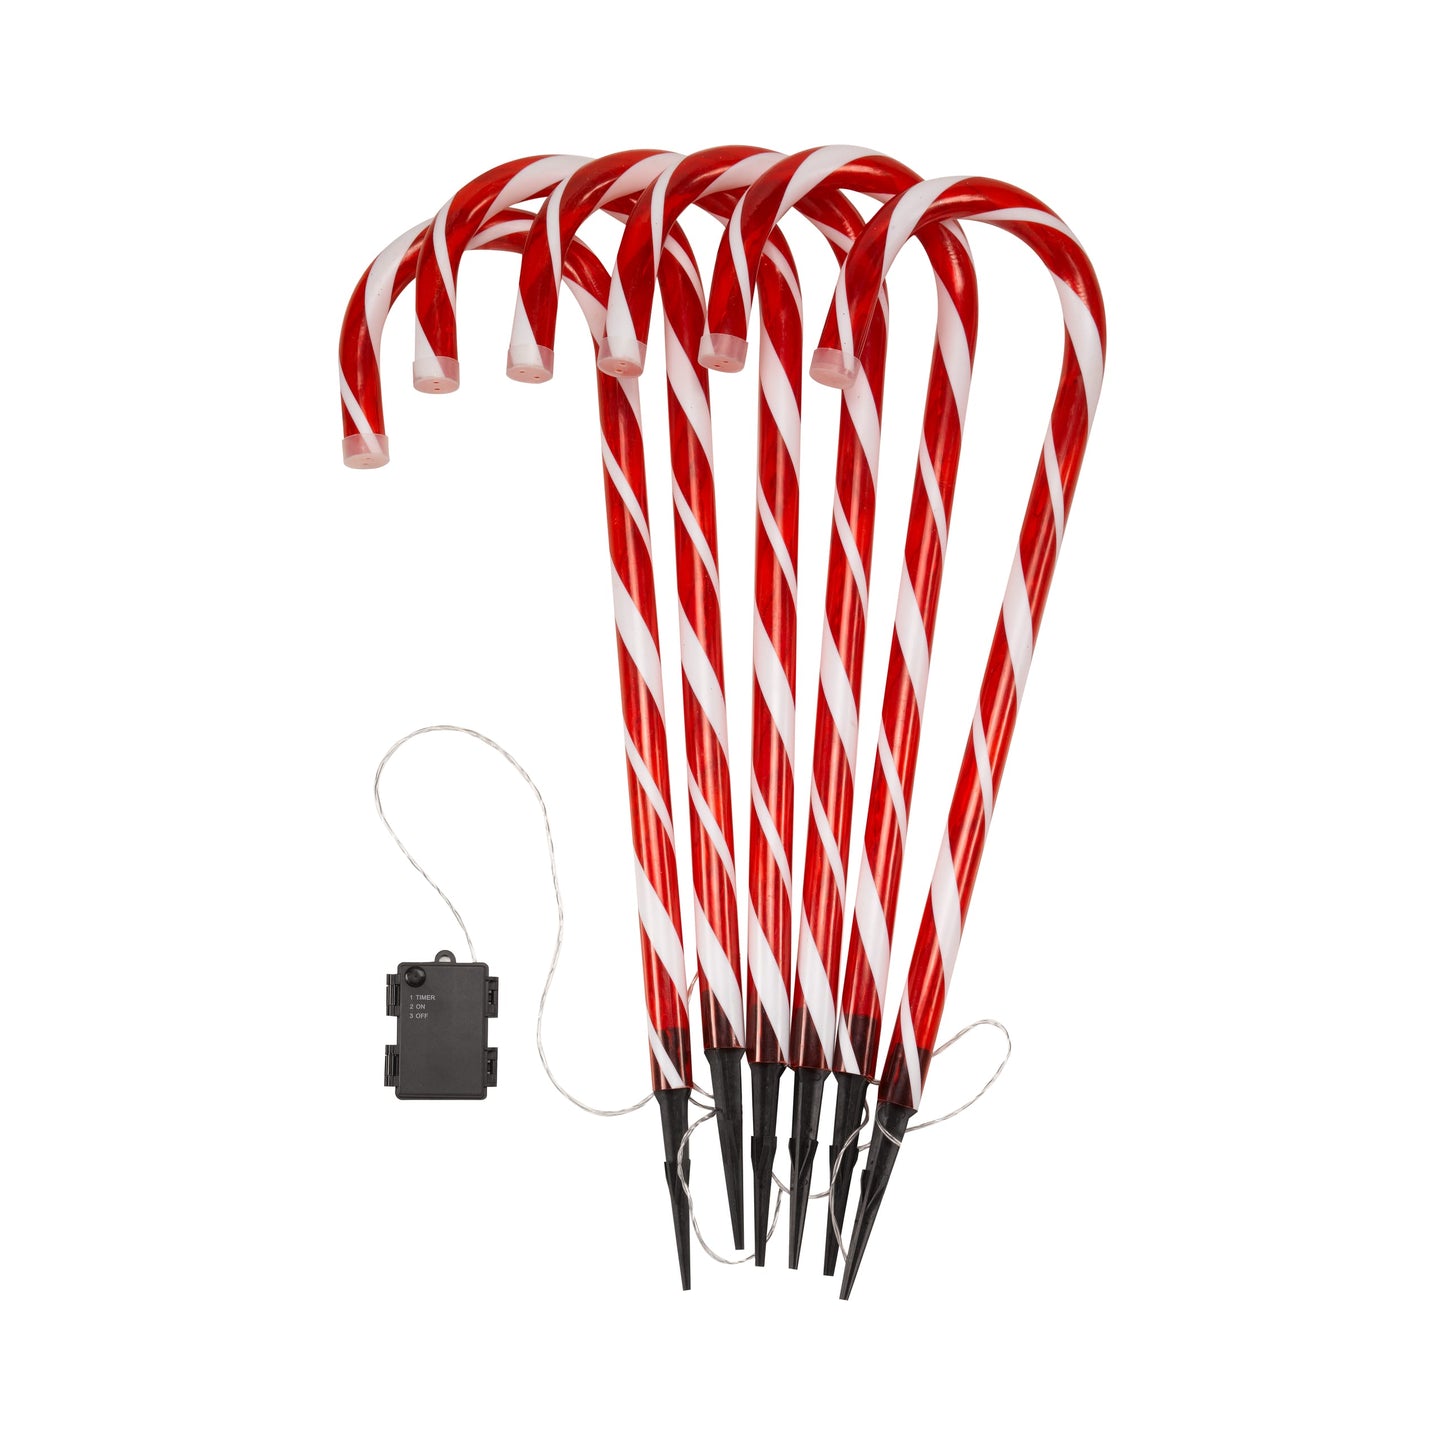 CandyCane Stakes